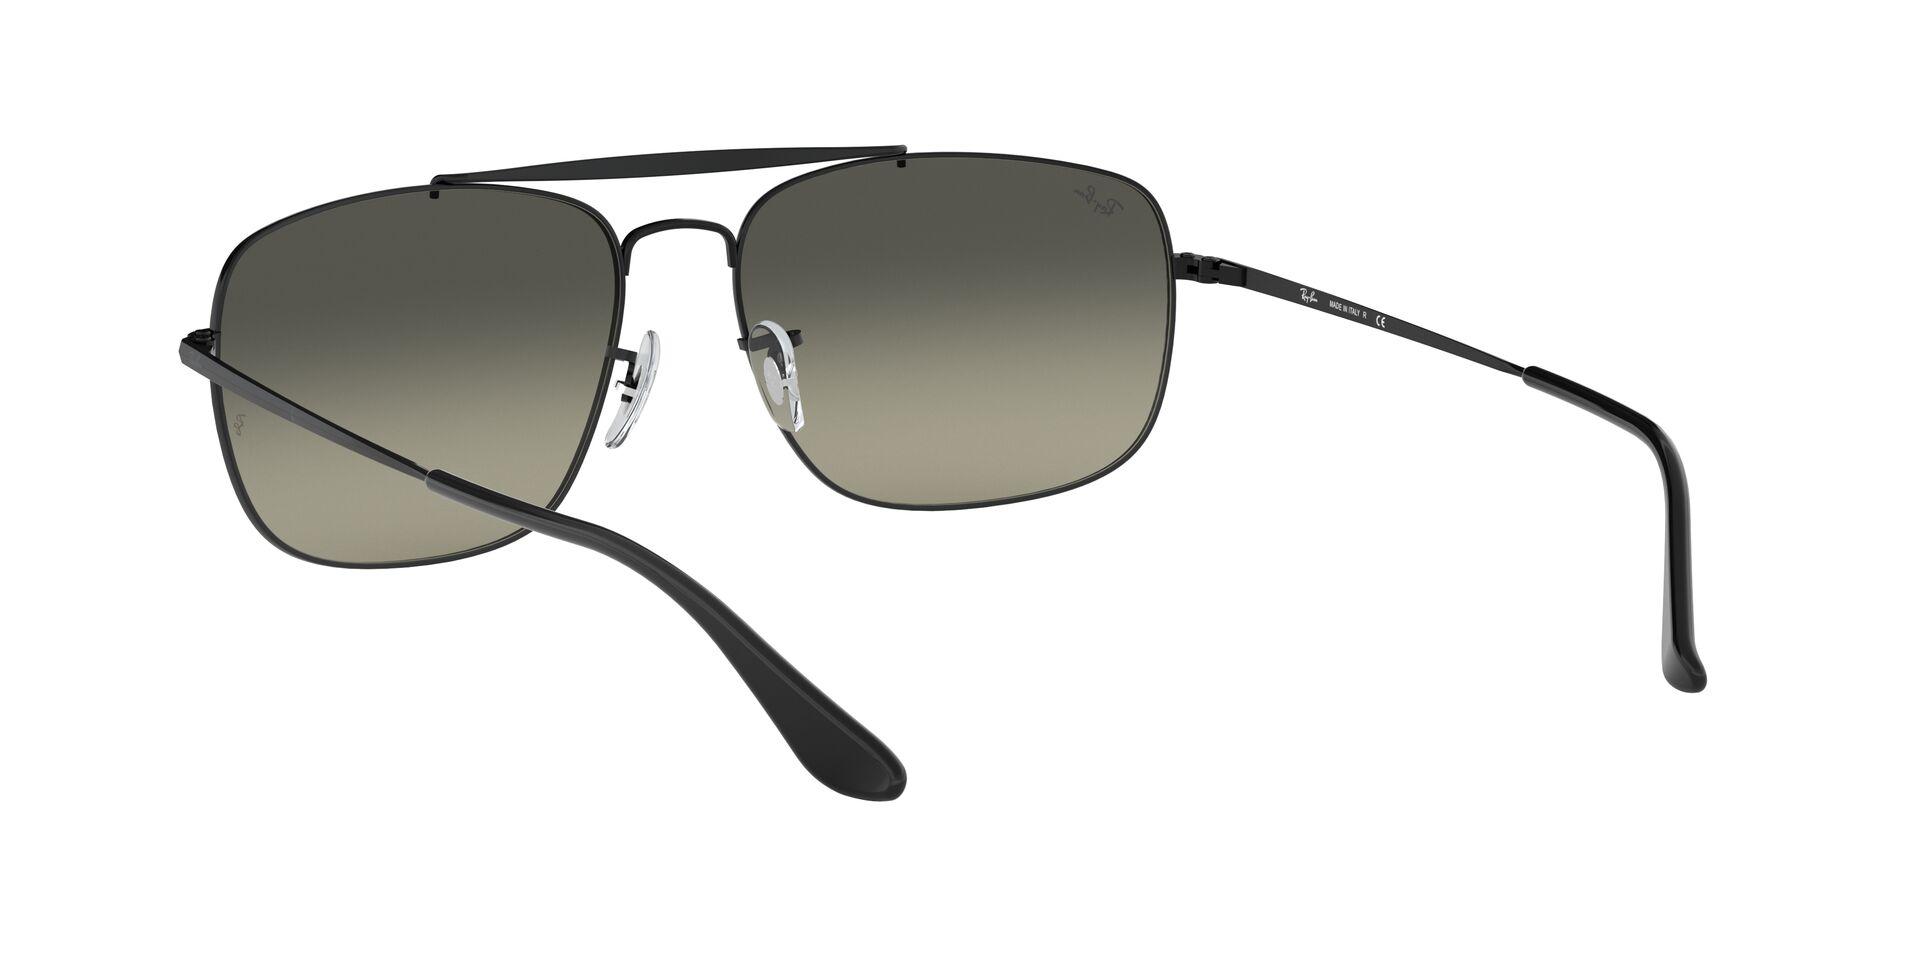 Mắt Kính Ray-Ban The Colonel - RB3560 002/71 -Sunglasses